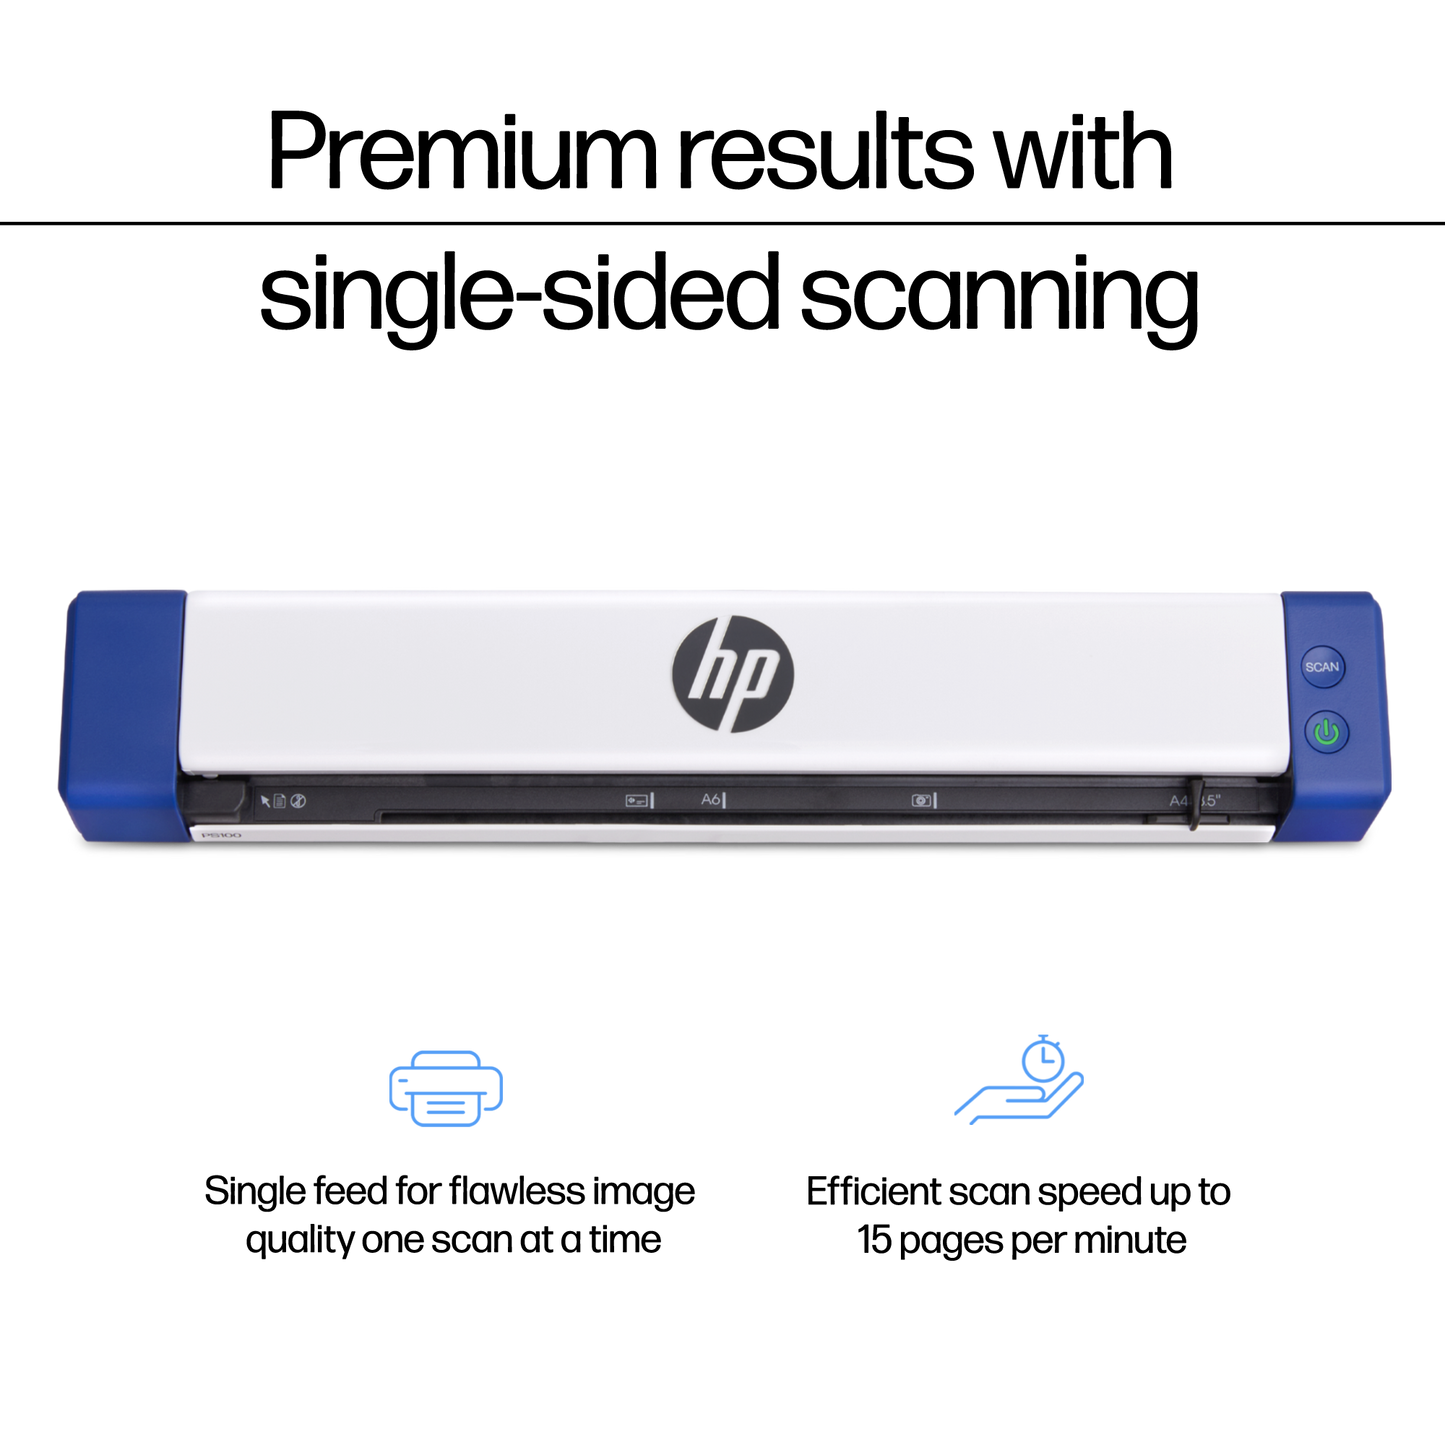 HP Portable USB Document Scanner for Single-Sided Scanning